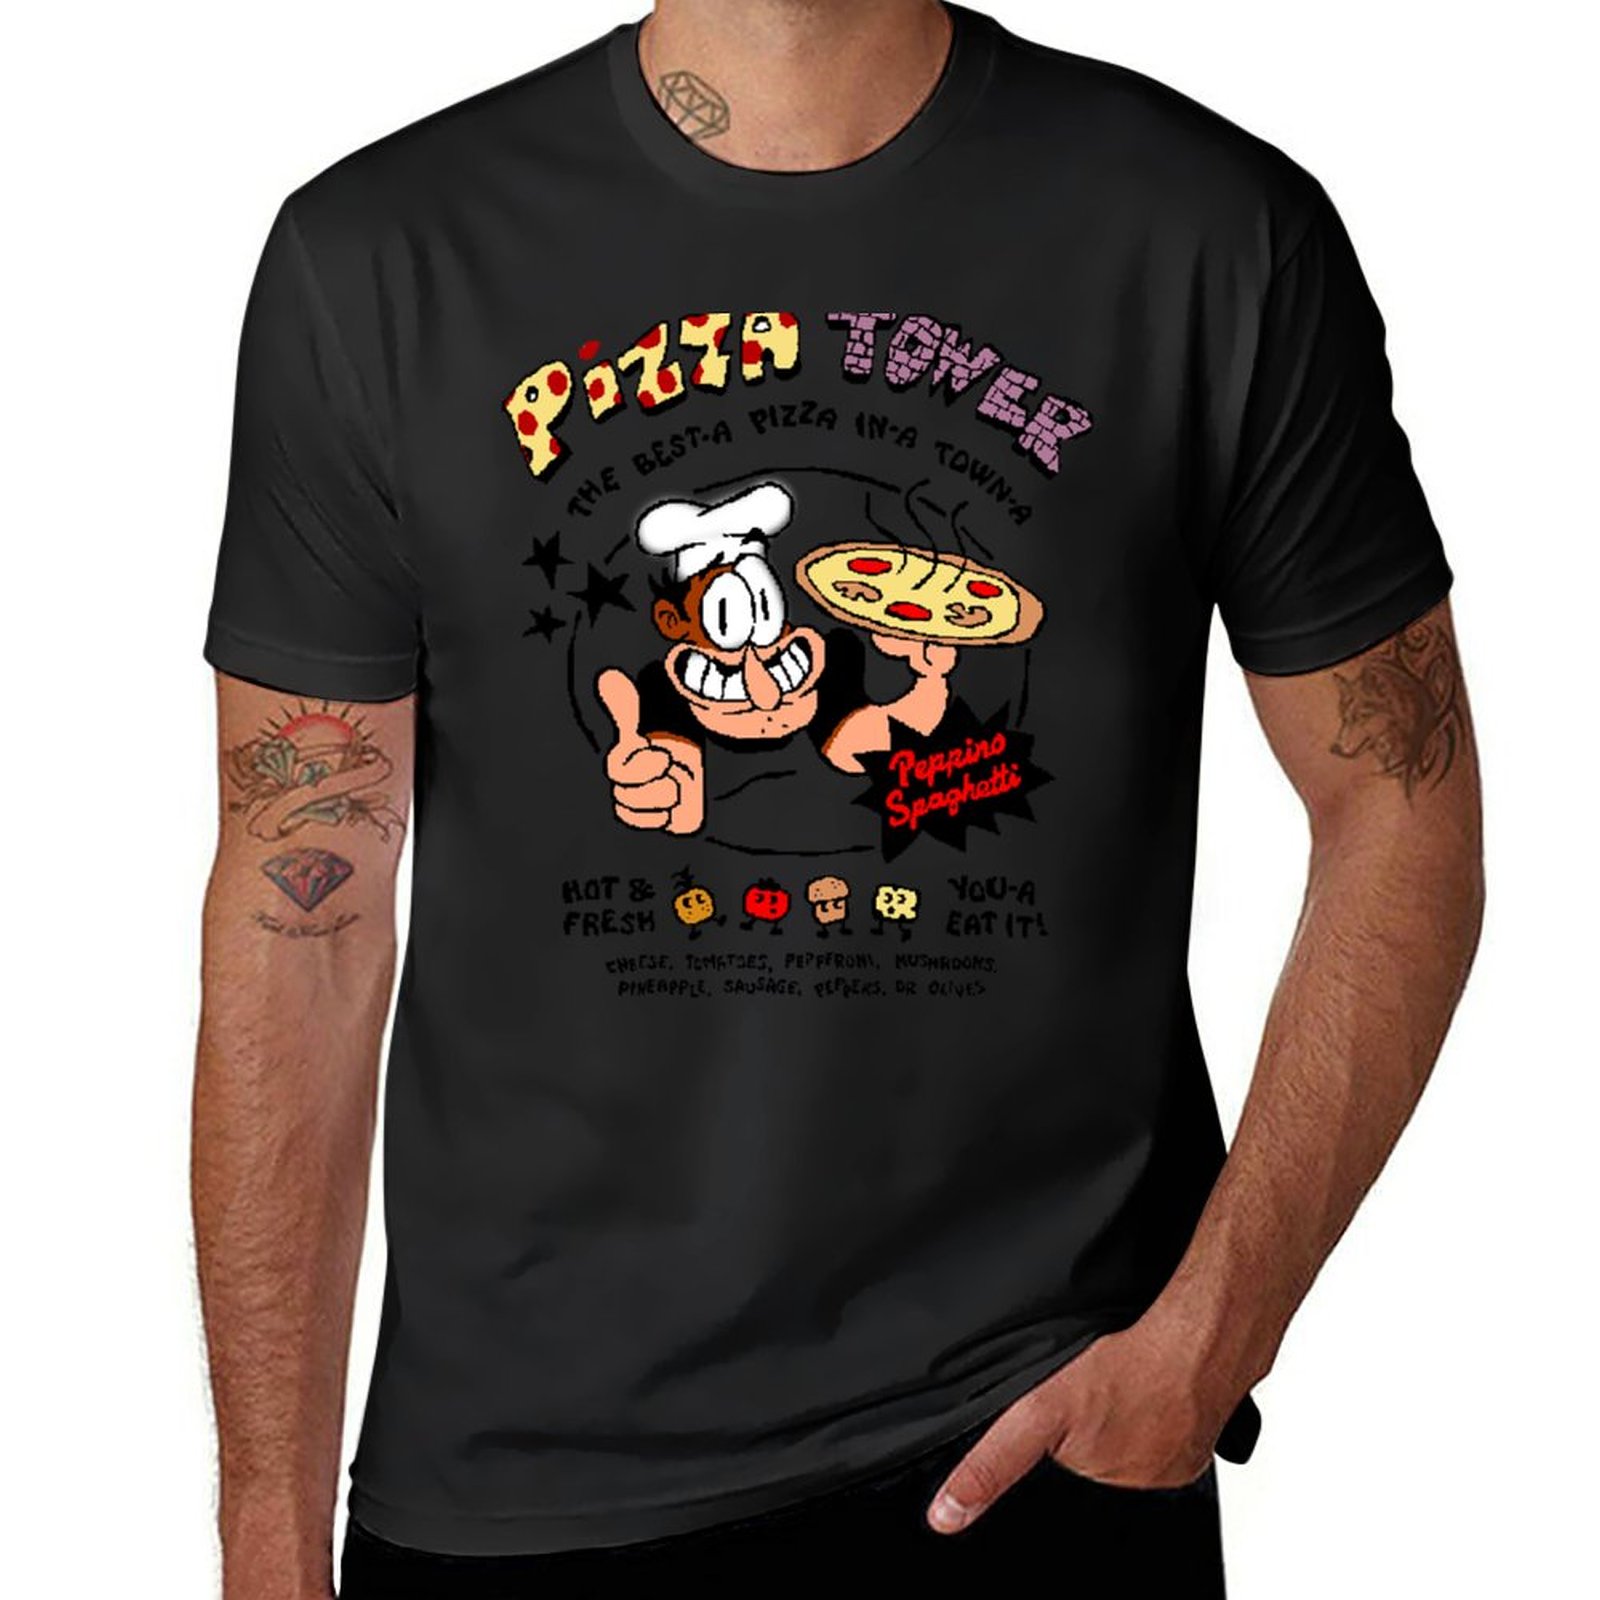 Pizza Tower The Best A Pizza In A Town A T Shirt quick drying shirt Aesthetic - Pizza Tower Plush